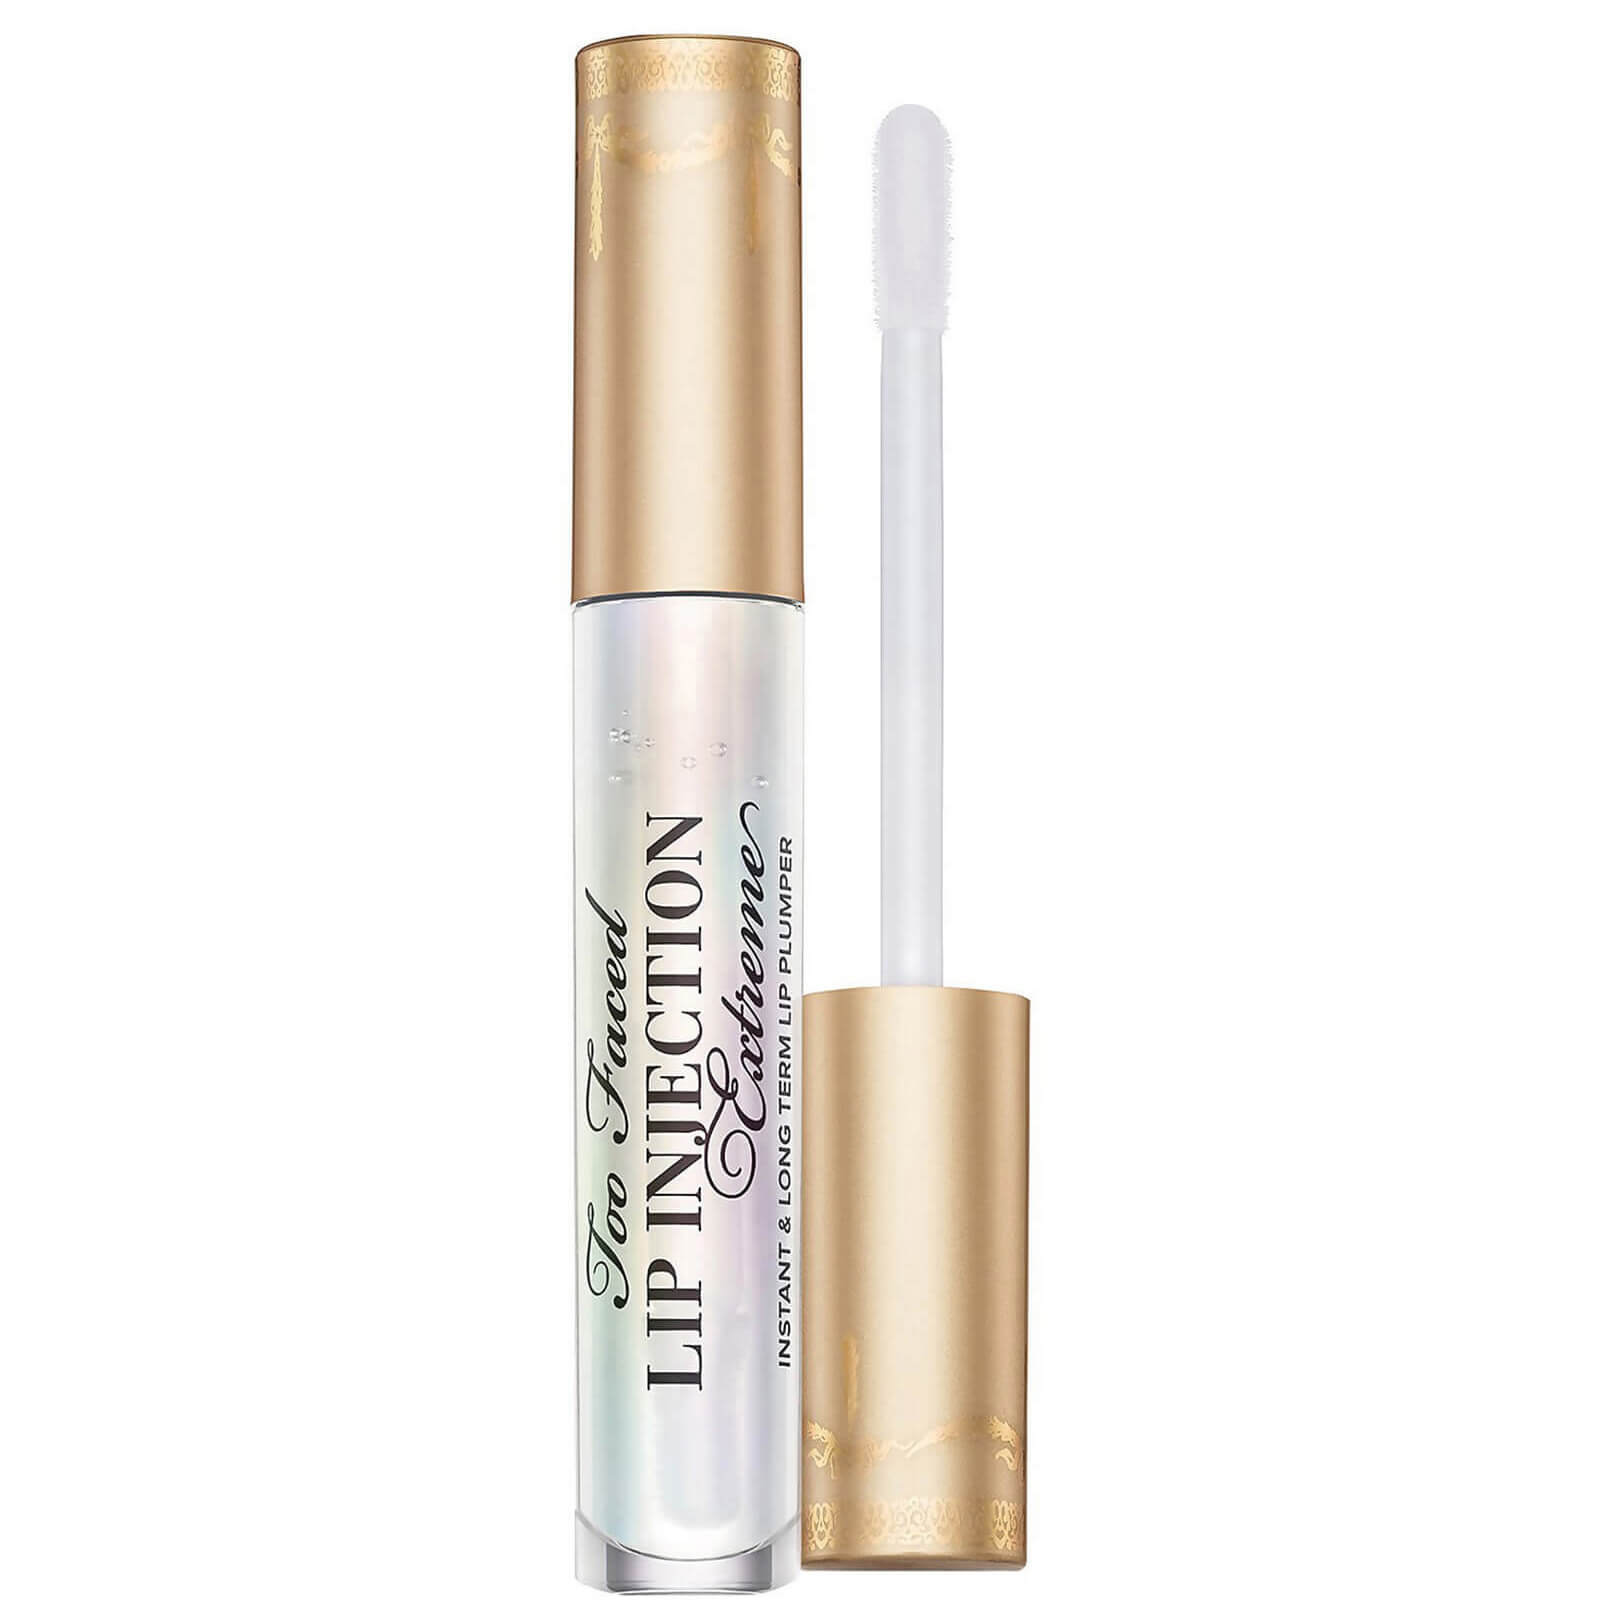 Image of Too Faced Lip Injection Extreme Lip Gloss 4ml